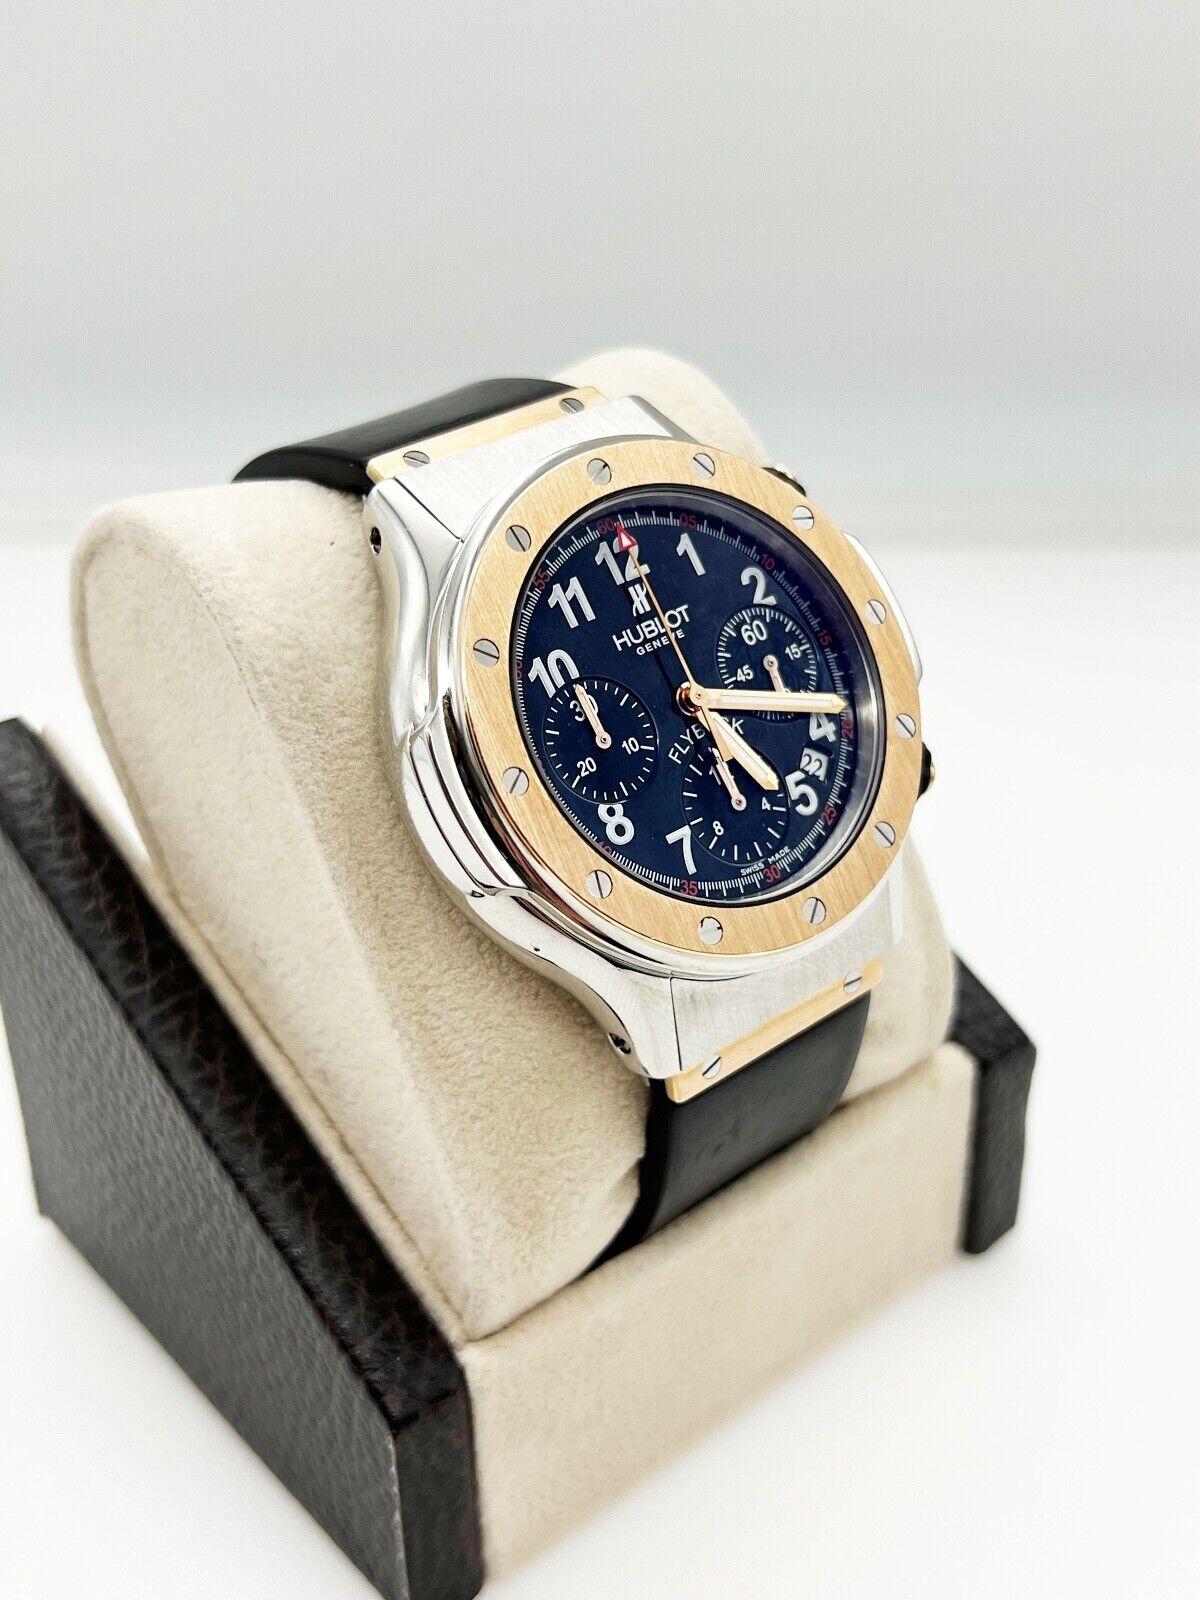 Style Number: 1926.7
 
Model: Super B Flyback 
 
Case Material: Stainless Steel 
 
Band: Rubber
 
Bezel:  18K Rose Gold
 
Dial: Black 
 
Face: Sapphire Crystal 
 
Case Size: 42.5mm 
 
Includes: 
-Elegant Watch Box
-Certified Appraisal 
-1 Year